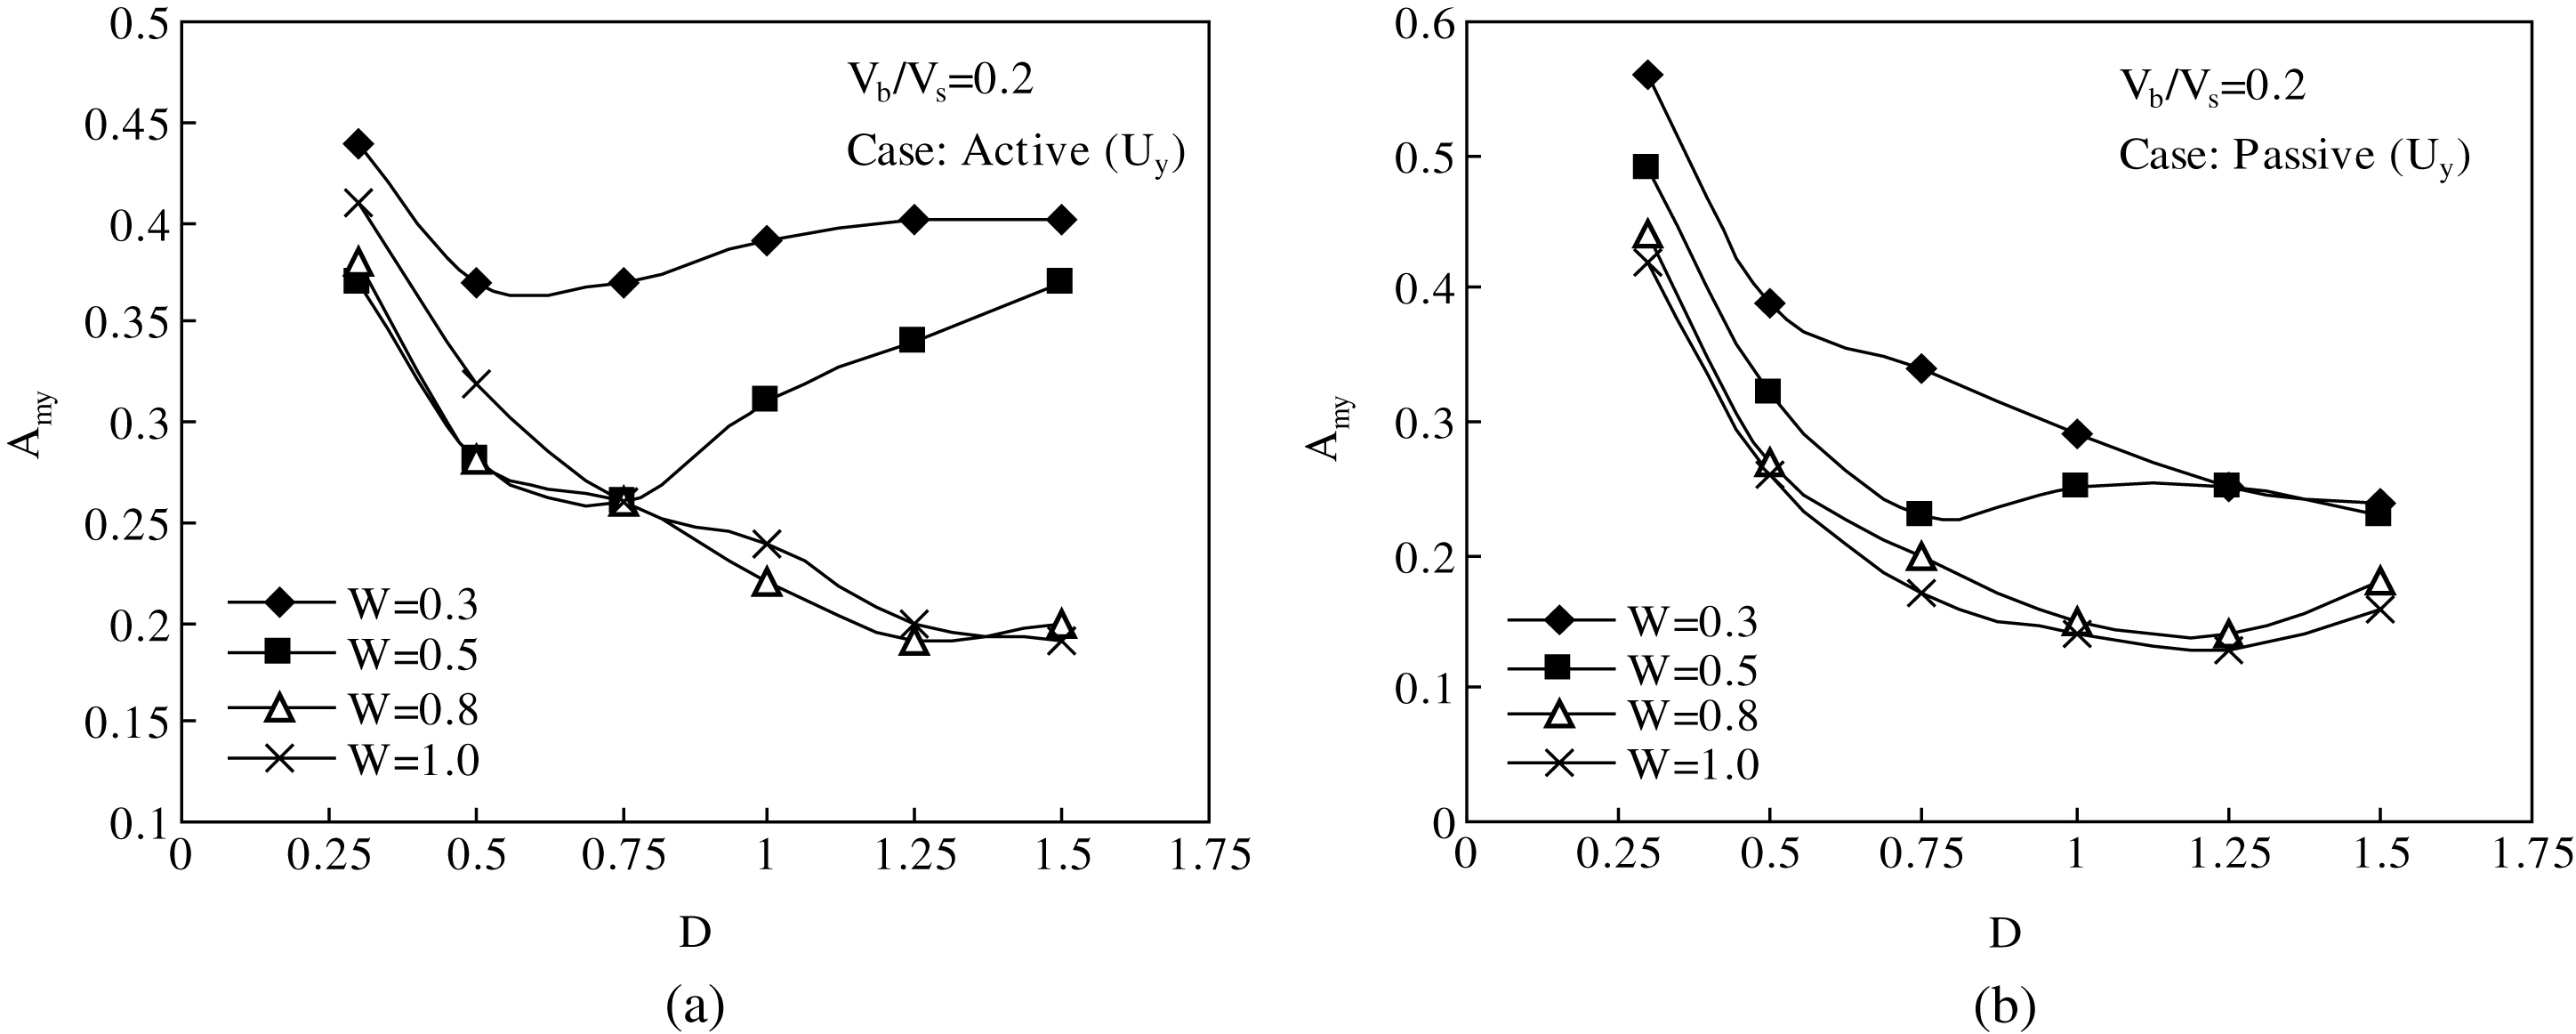 Effect of depth and width on reducing vertical vibration in (a) active case (b) passive case.